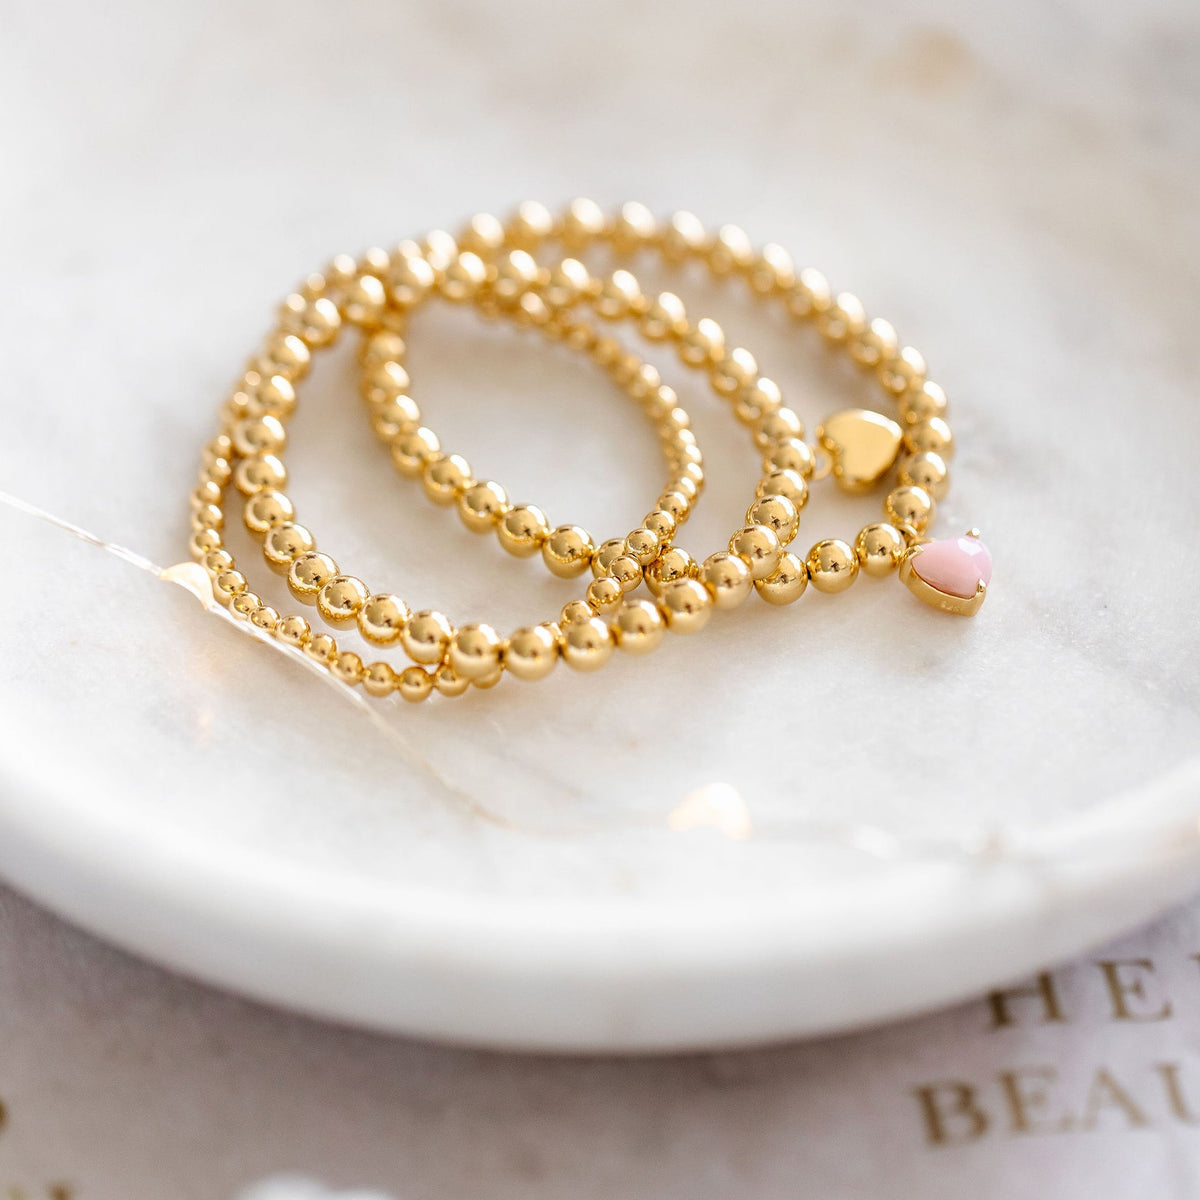 FRAICHE INSPIRE SWEETHEART STRETCH BRACELET – PINK OPAL &amp; GOLD 7&quot; - SO PRETTY CARA COTTER